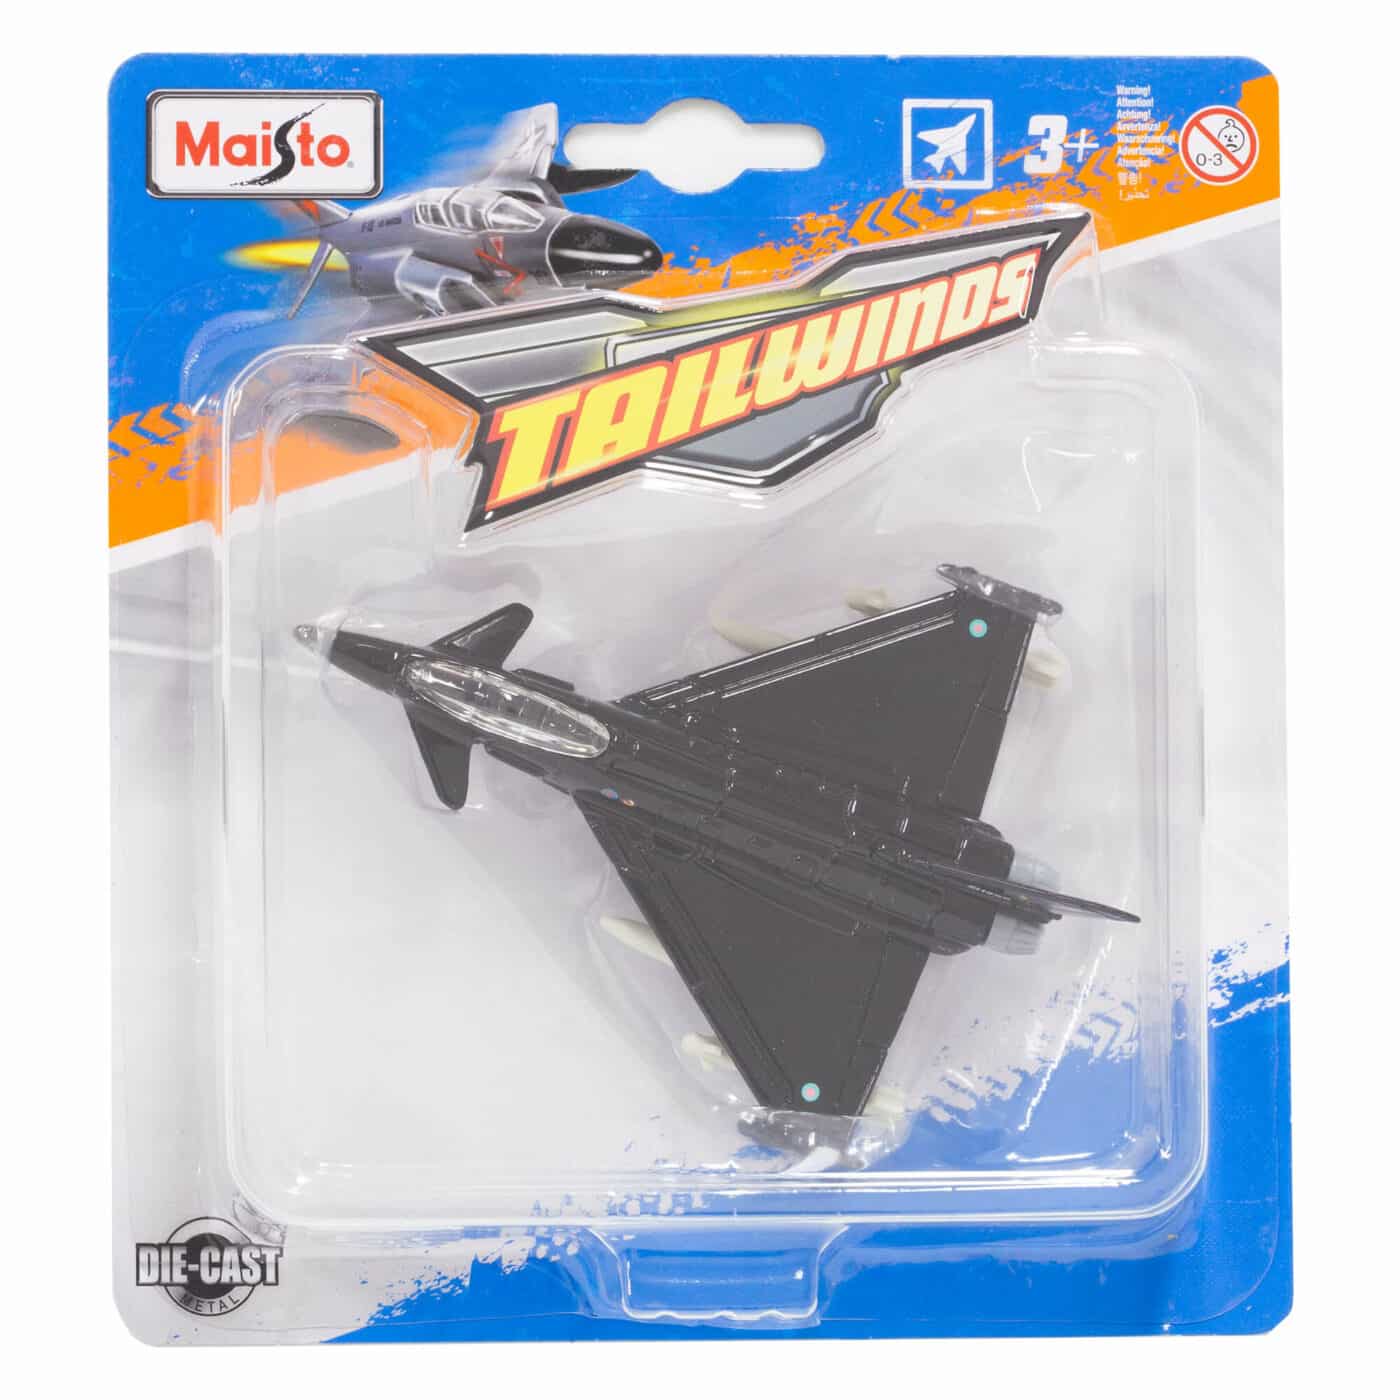 Maisto-tailwings-die-cast-zh588